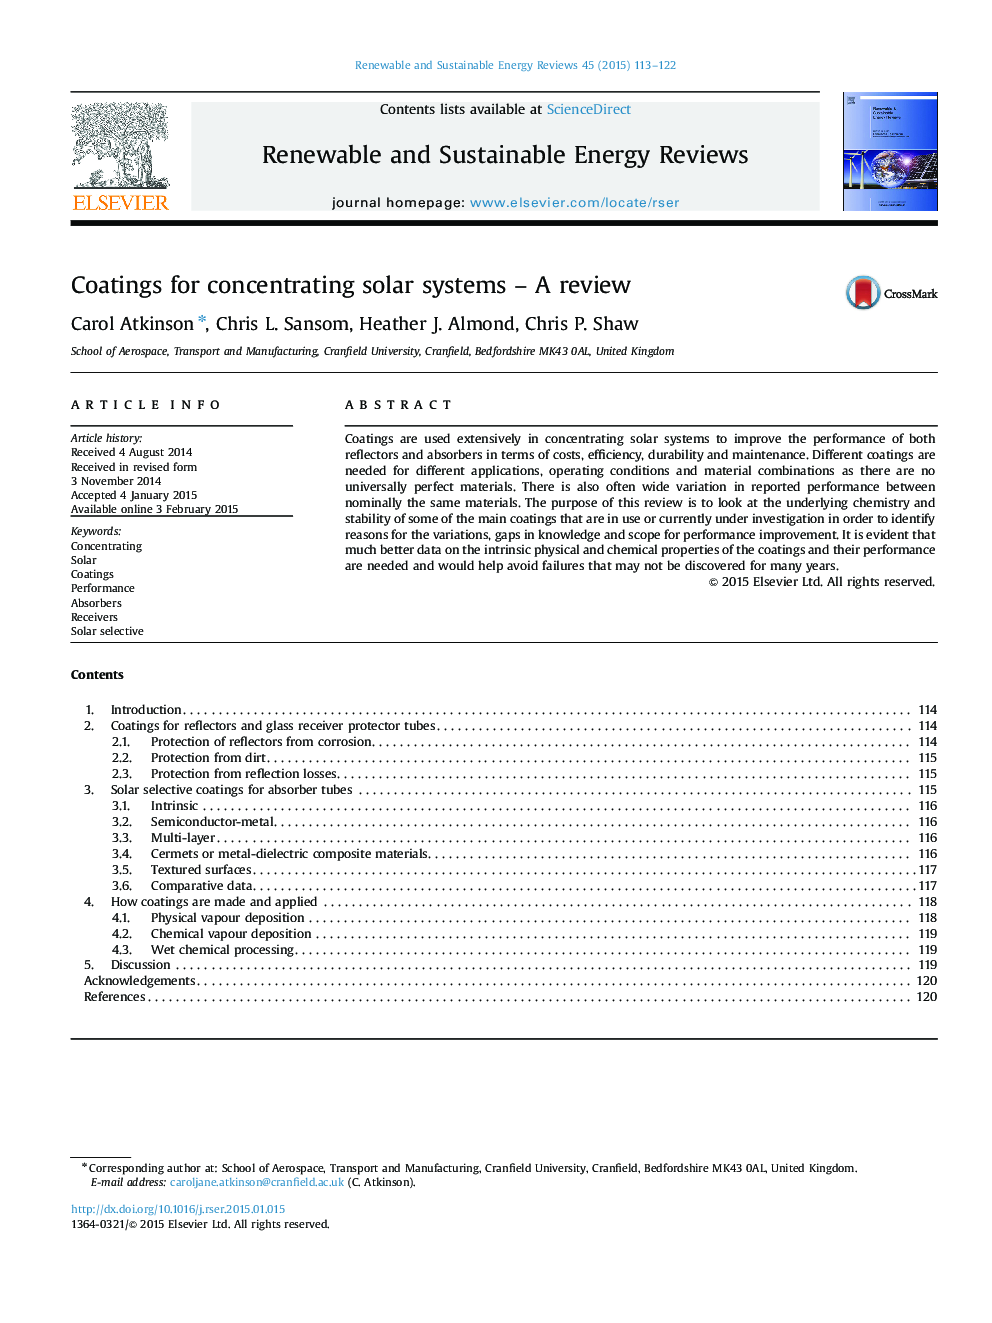 Coatings for concentrating solar systems – A review